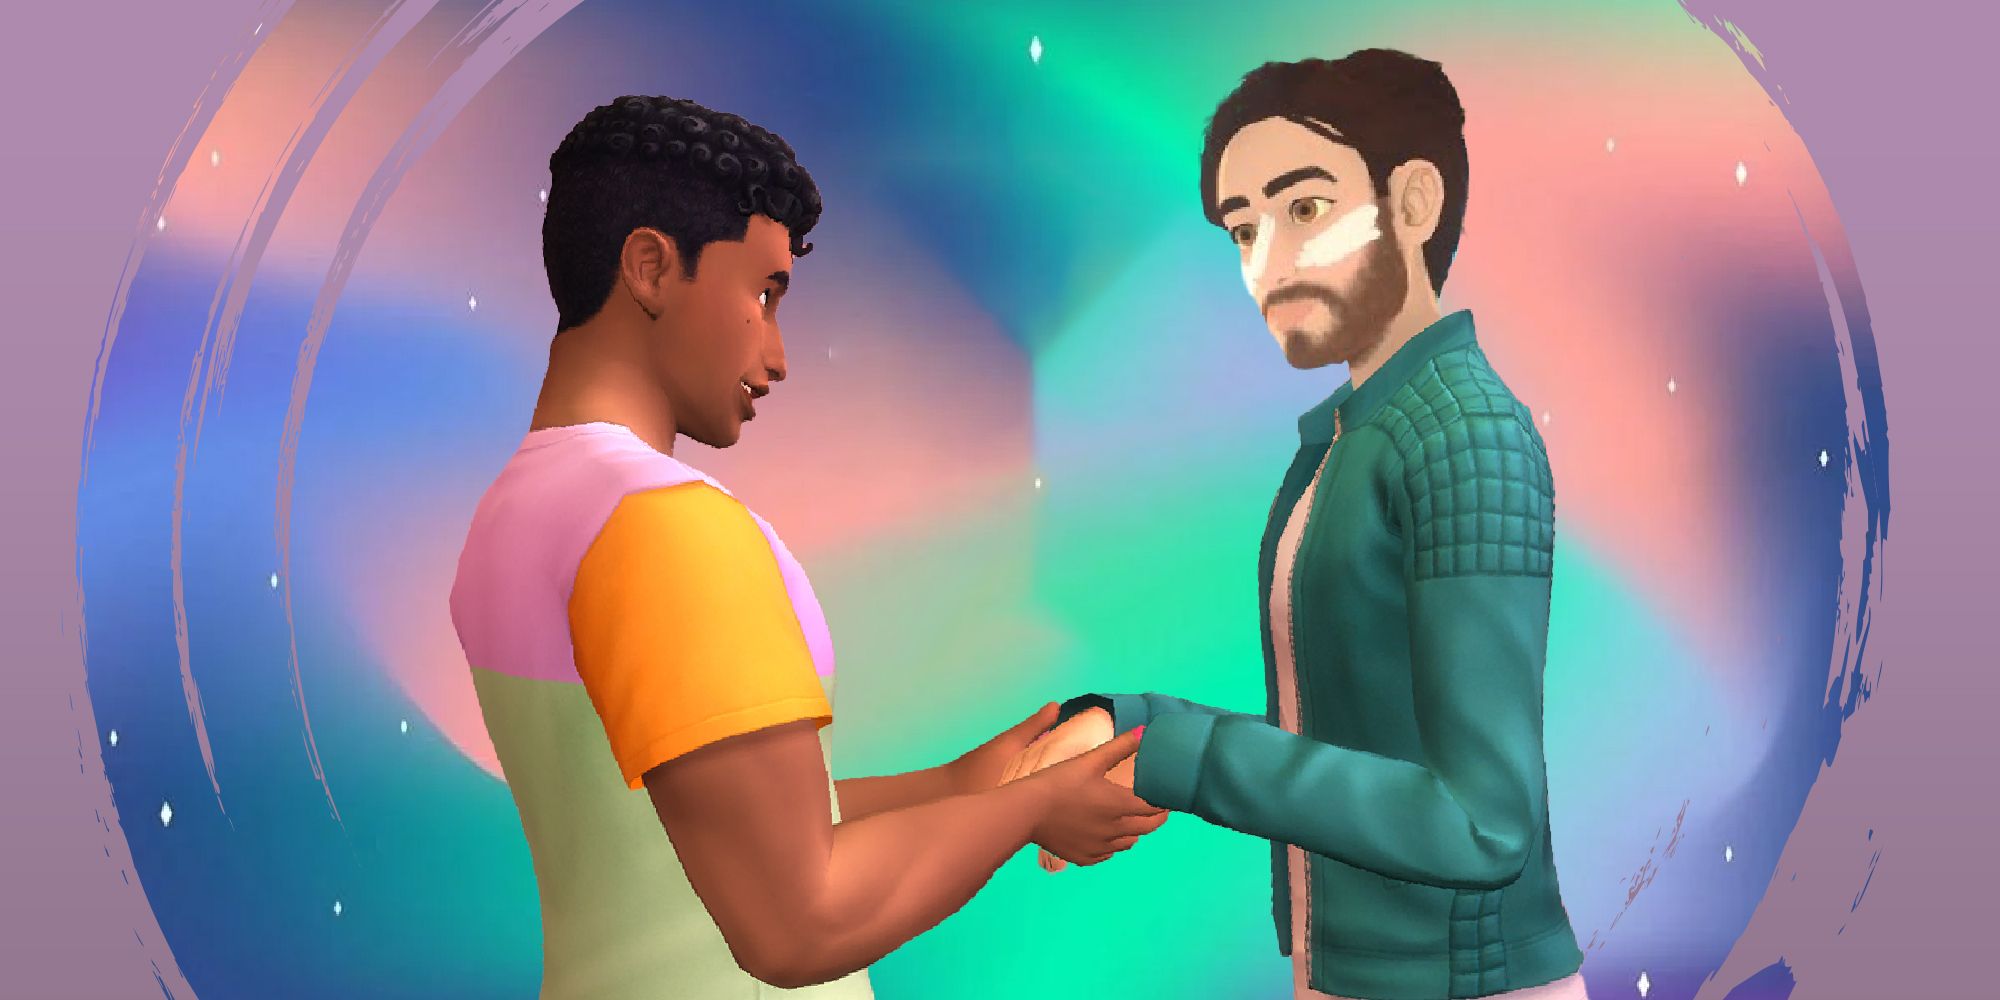 A Sim and a Paralives equivalent holding hands